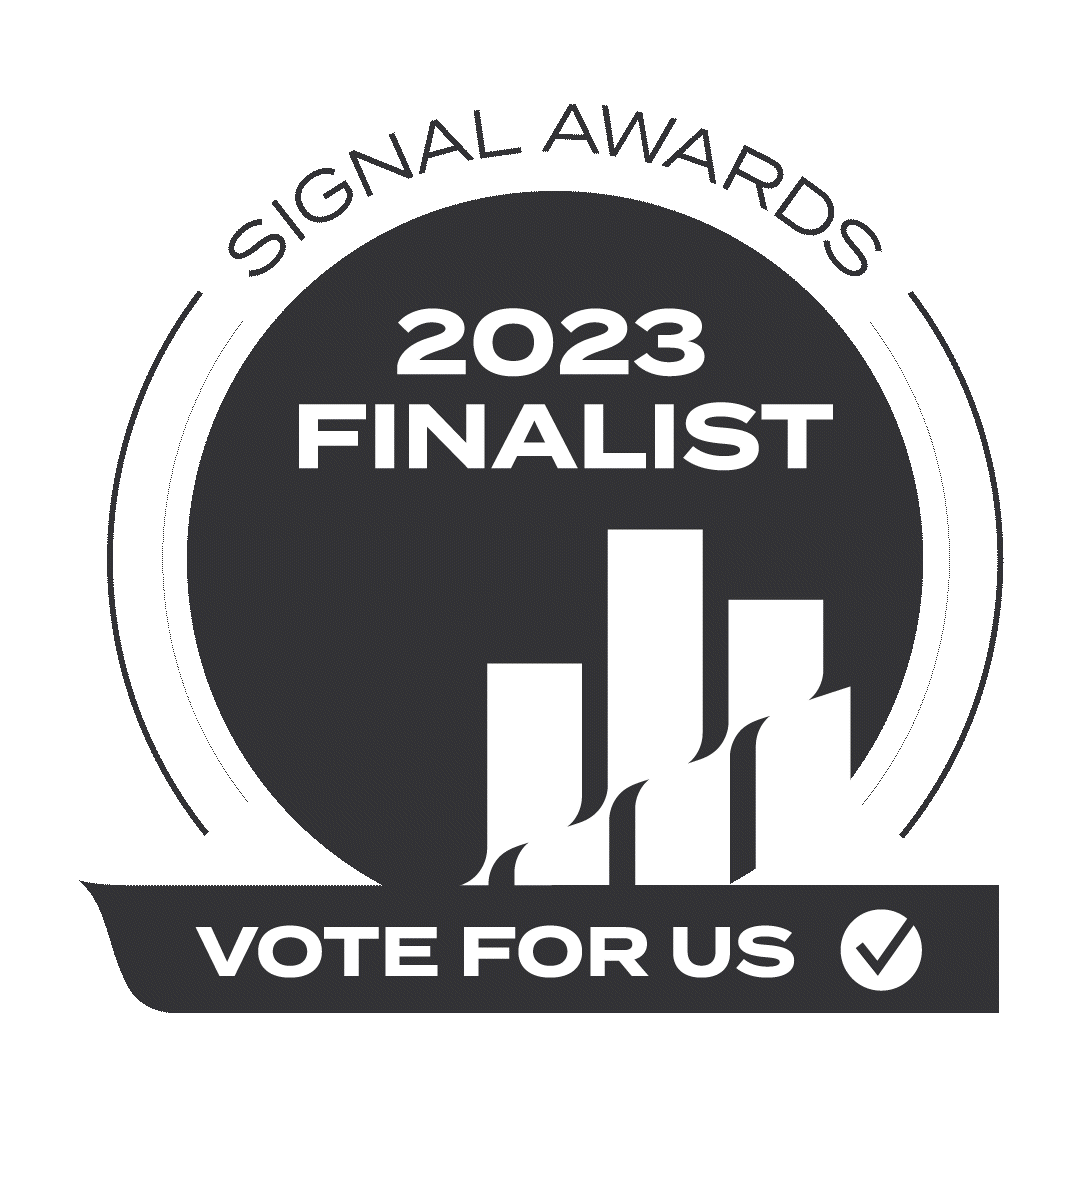 Vote for us in the Signal Awards 2023